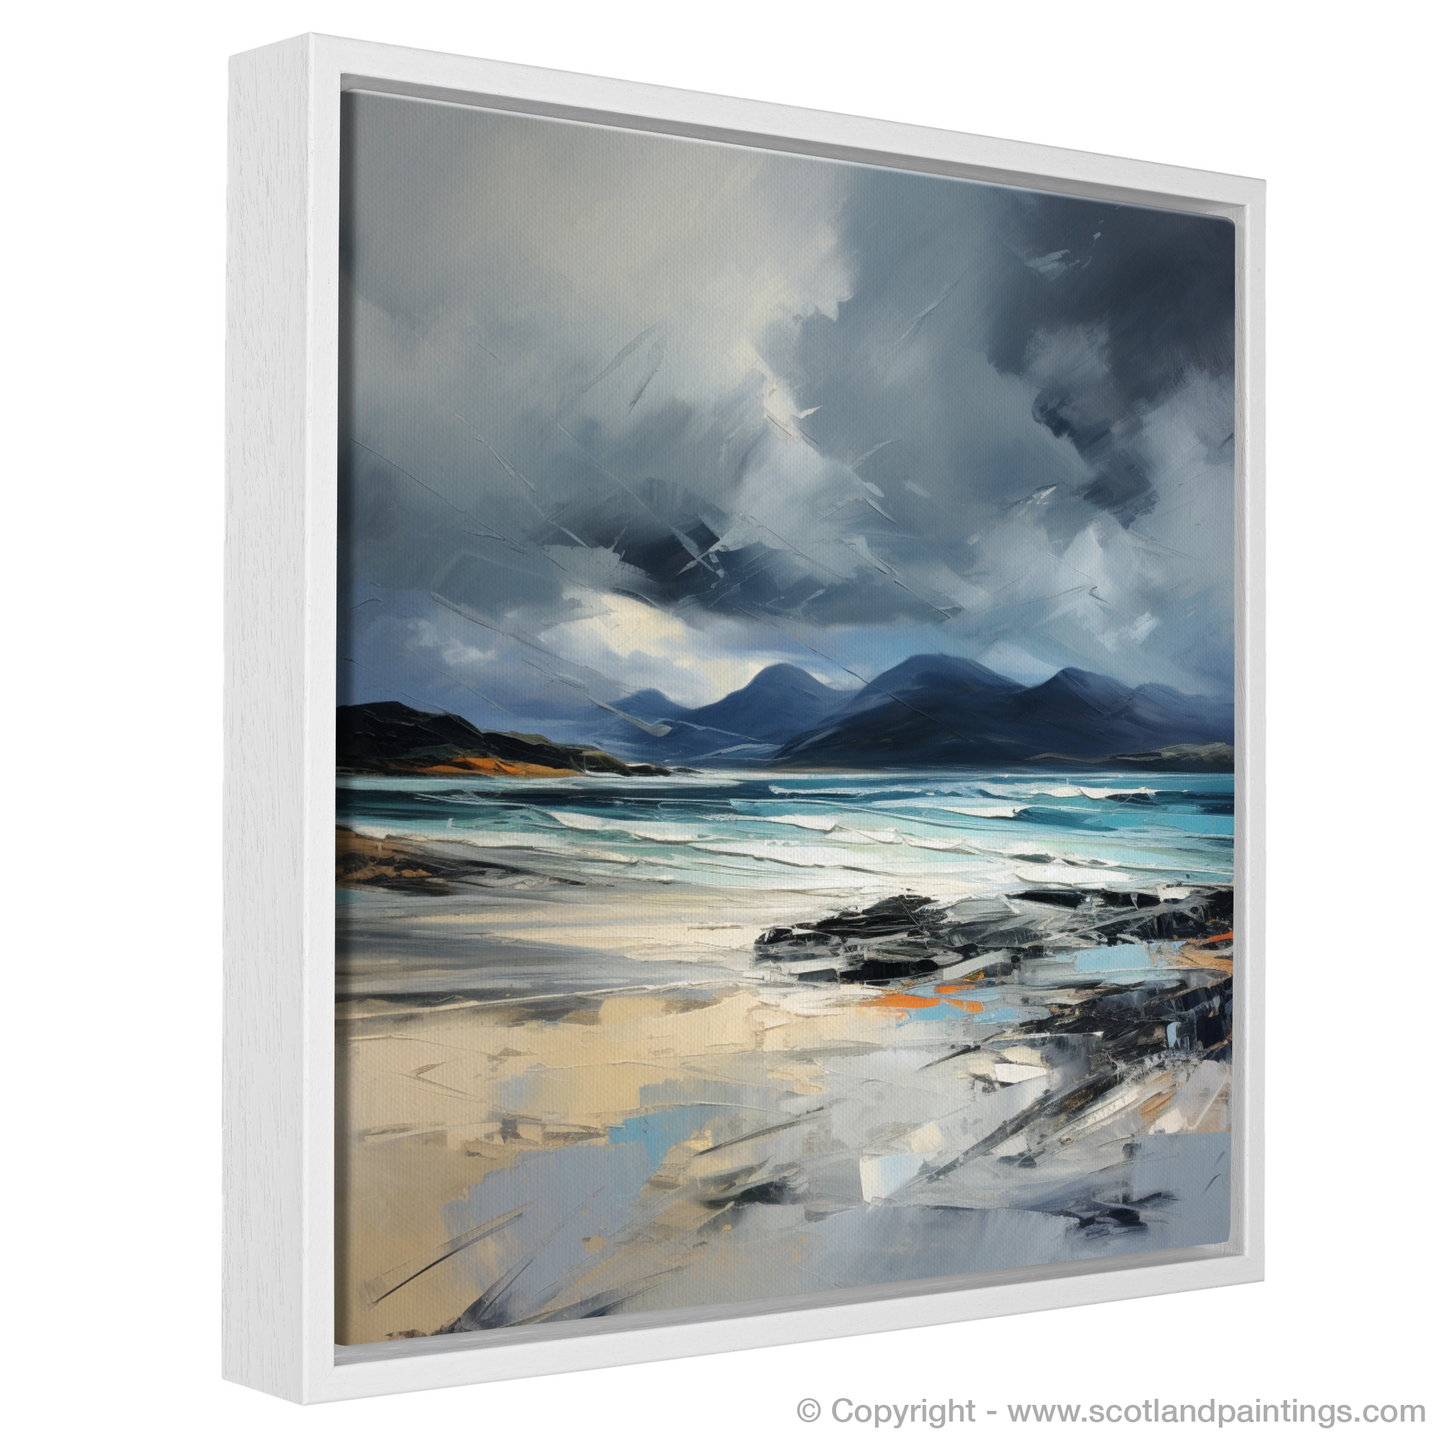 Tempest of Camusdarach: An Abstract Impressionist Journey